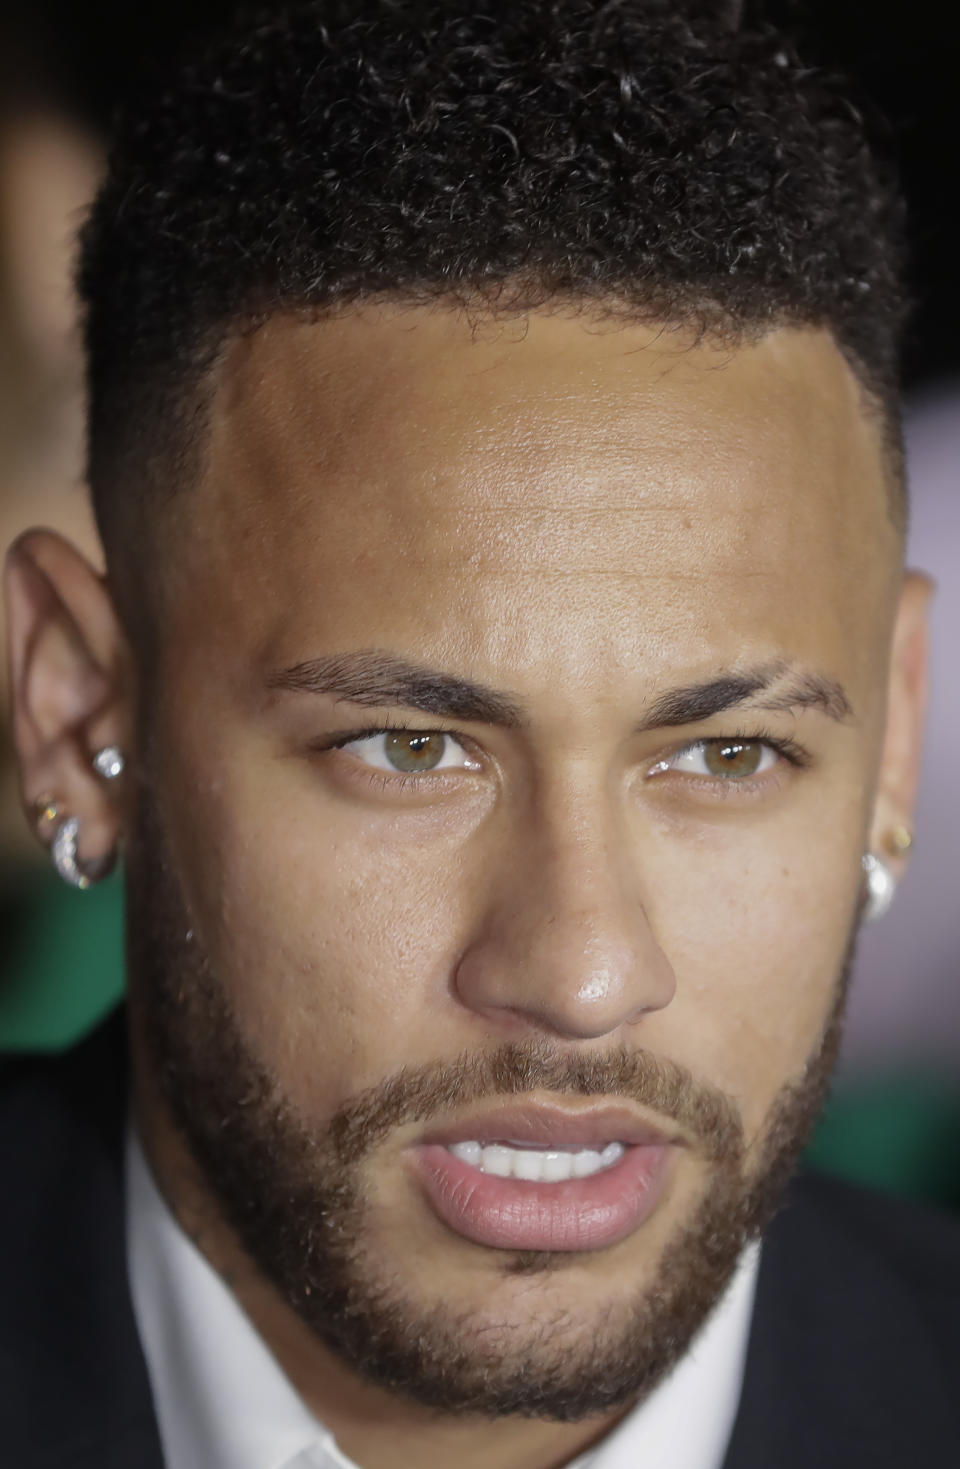 Brazil's soccer player Neymar speaks to the press as he leaves a police station where he answered questions about rape allegations against him in Sao Paulo, Brazil, Thursday, June 13, 2019. Neymar denies any wrongdoing. (AP Photo/Andre Penner)